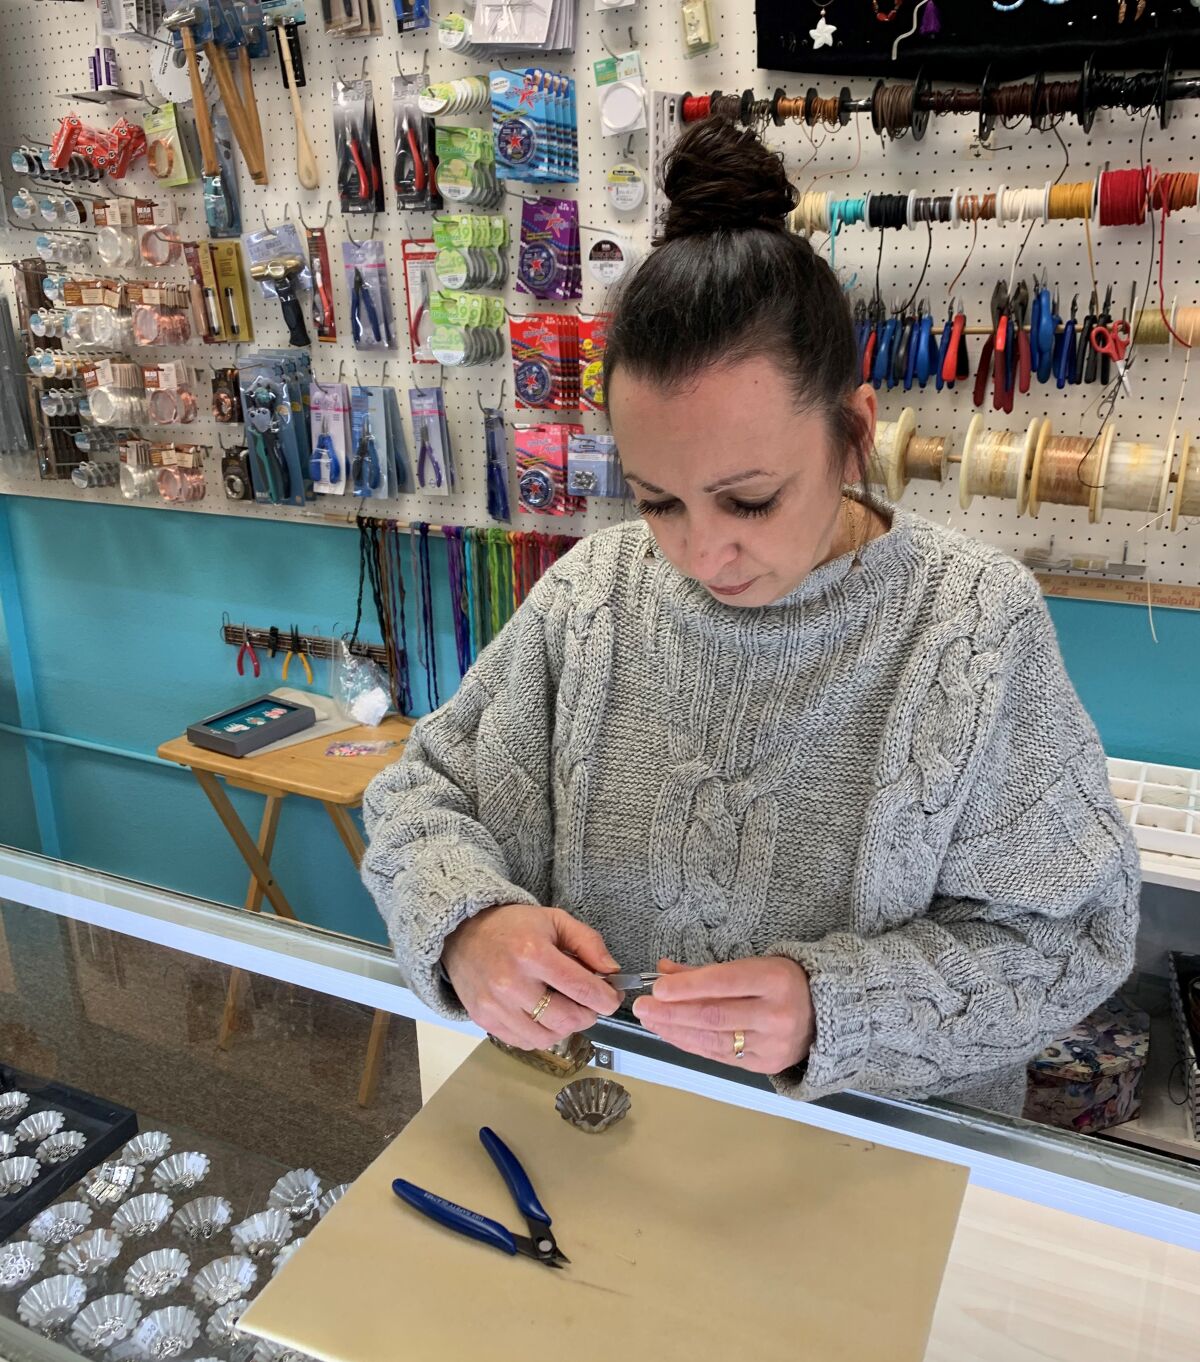 Julia Candillo, owner of Beads and More, has worked on beading projects nearly every day since 1993.